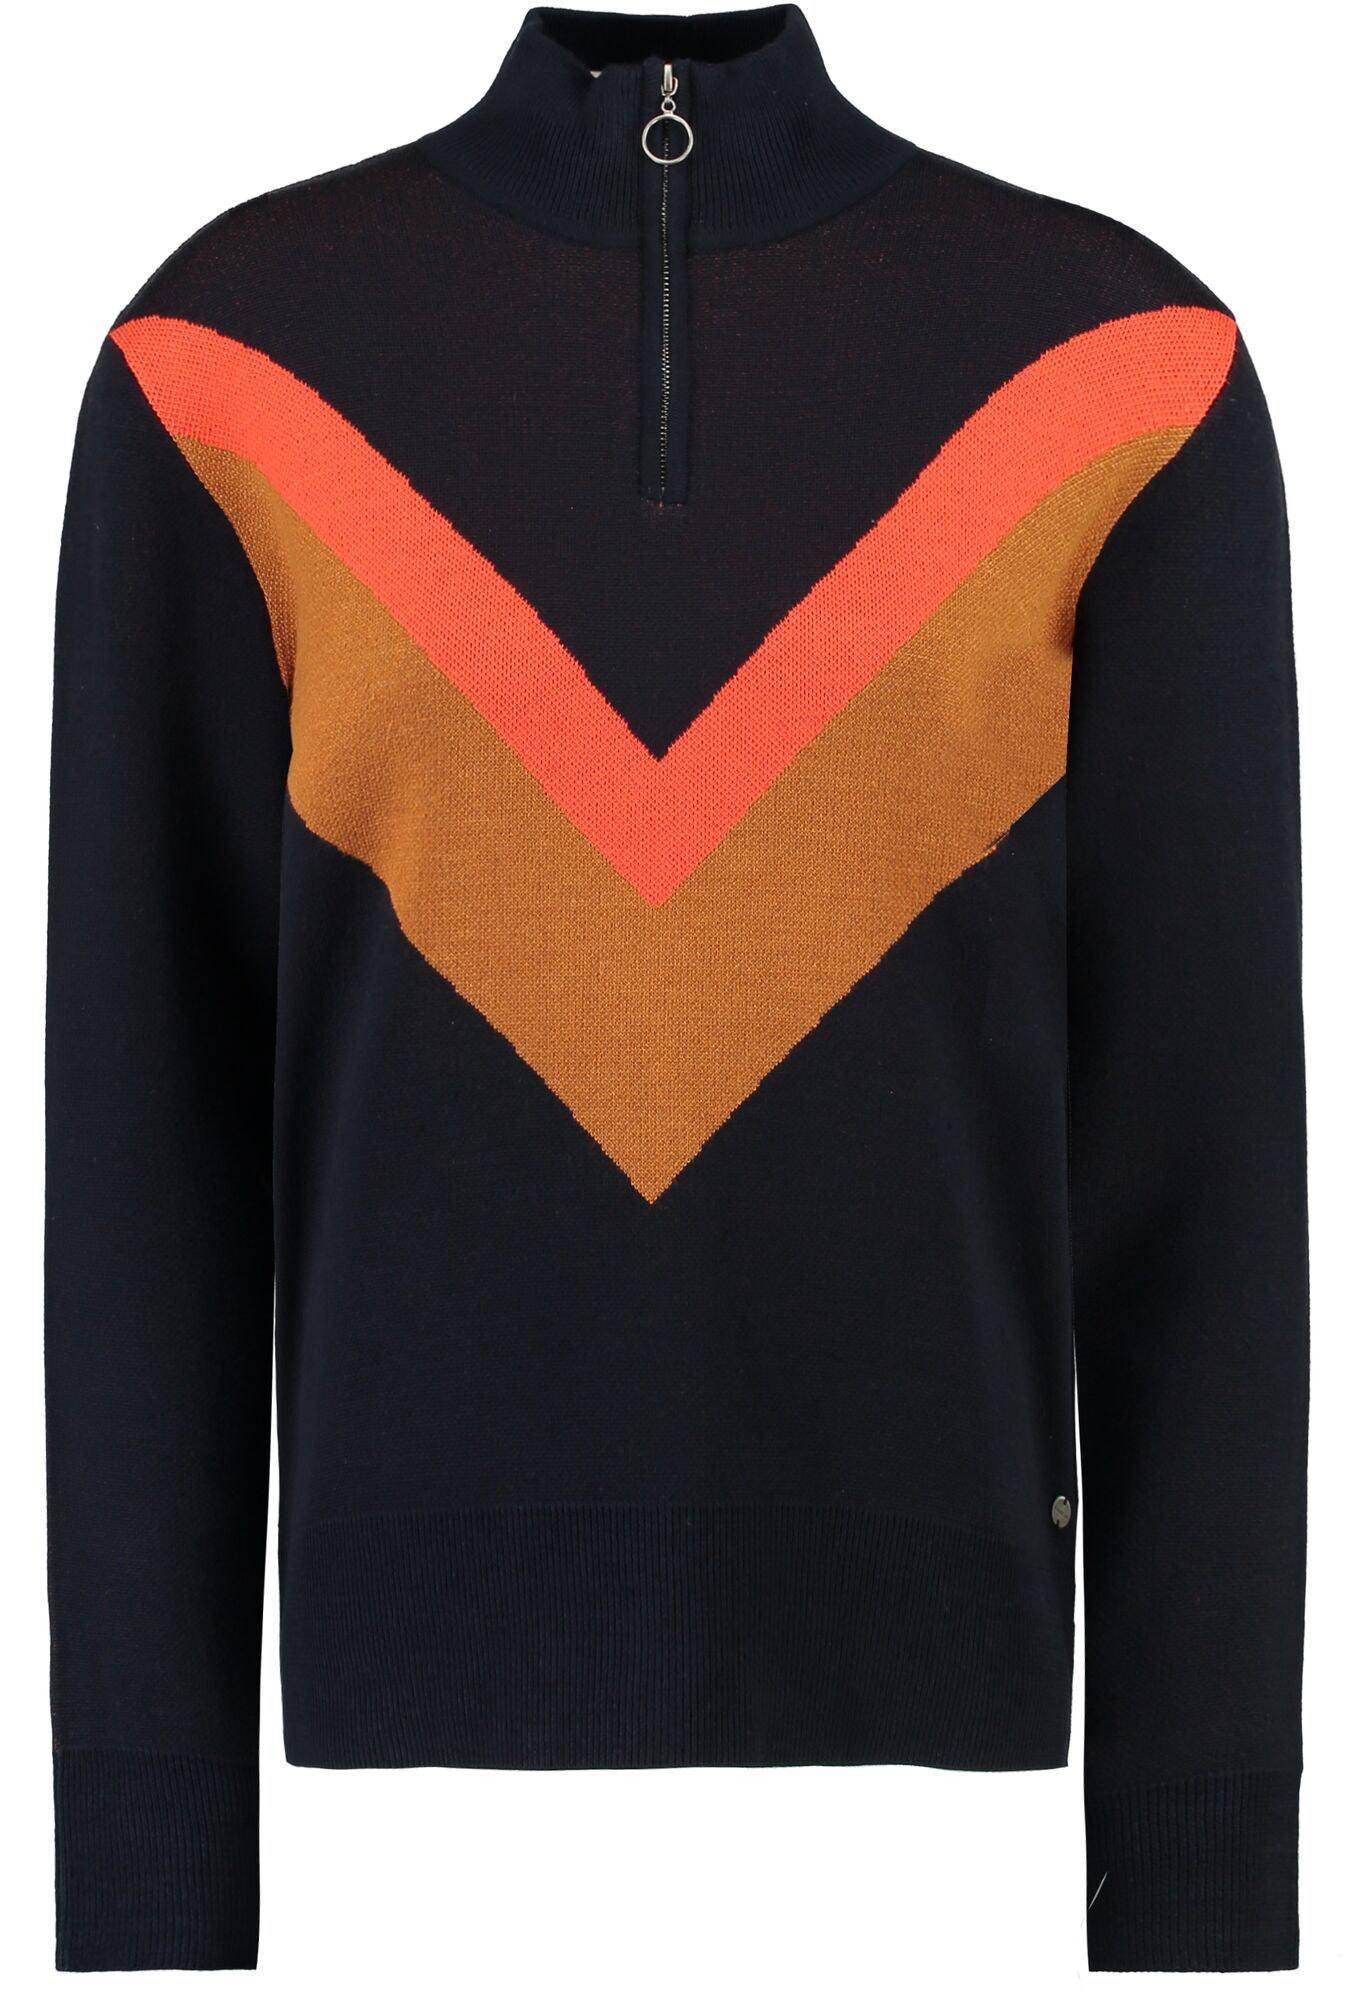 Garcia dark blue sweater with zipper - Your Style Your Story